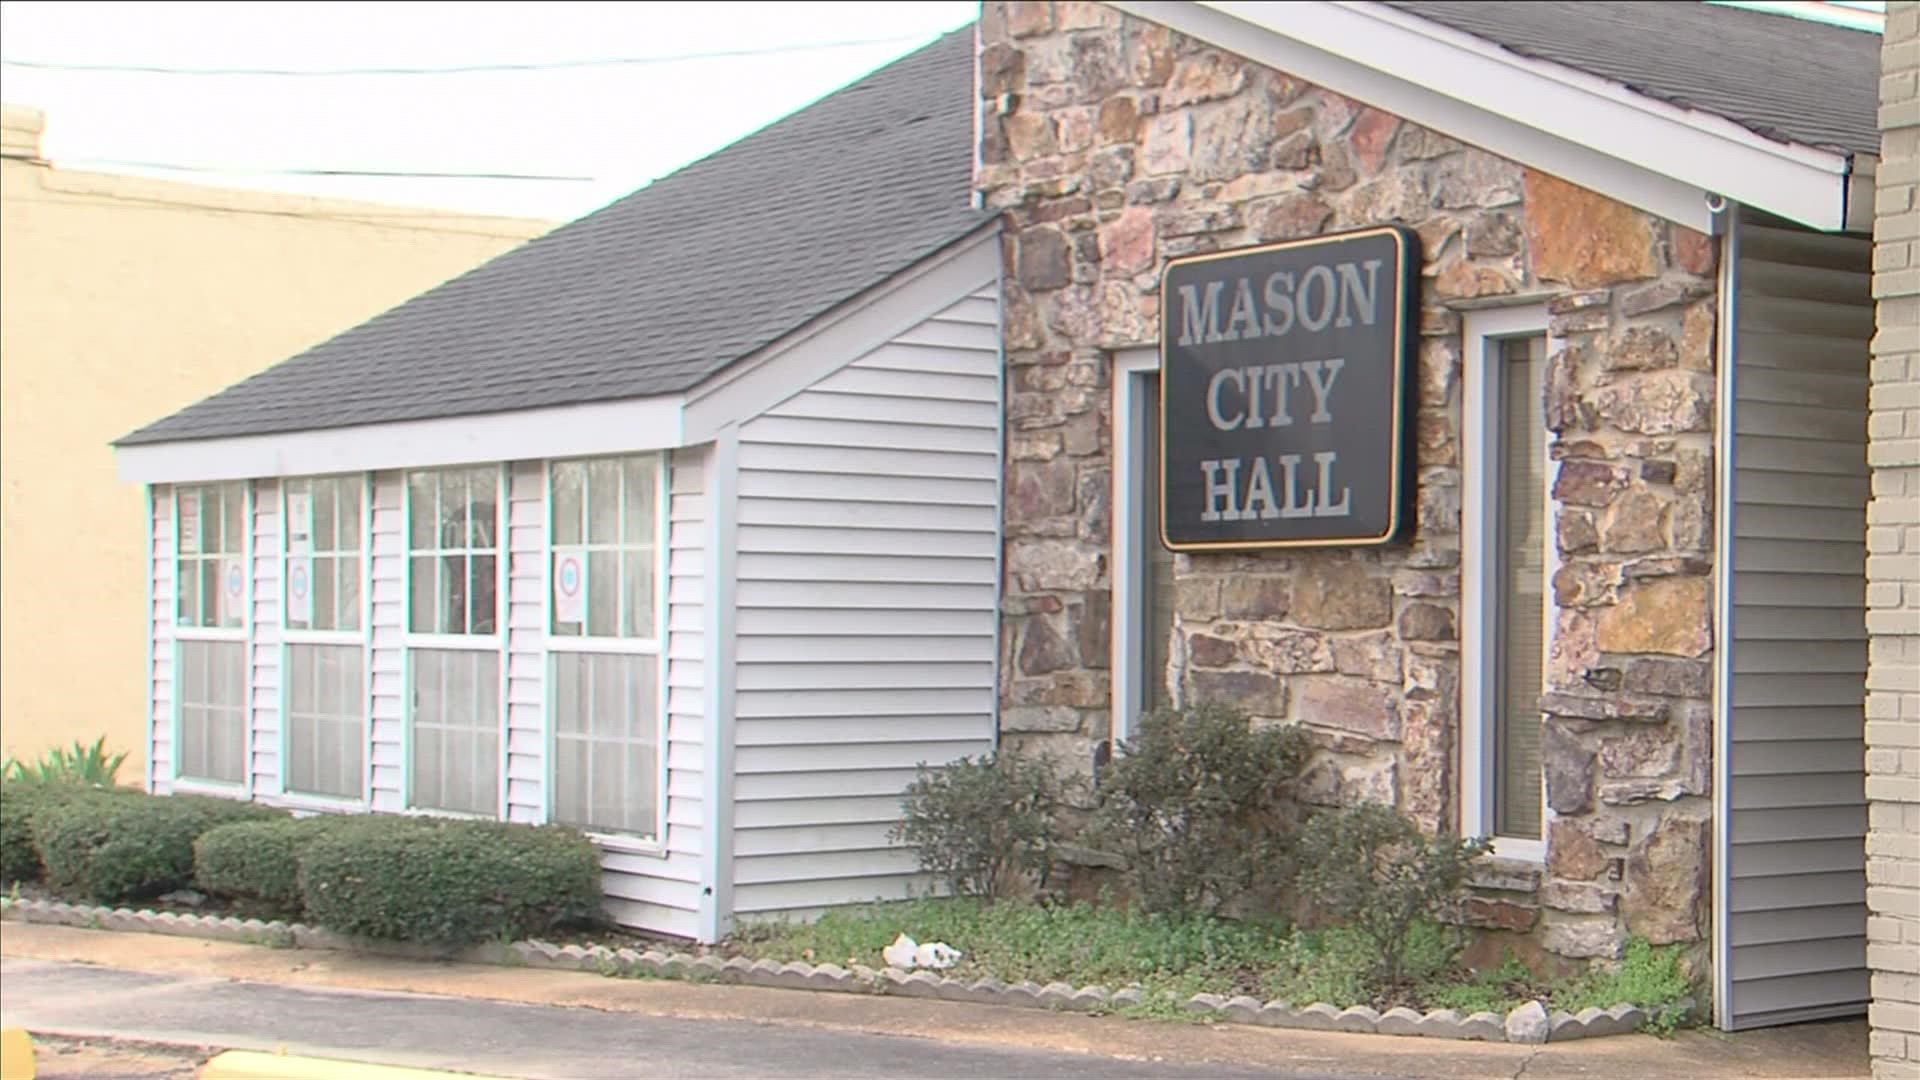 State auditors were in Mason, Tennessee, Friday going over the books for the financially troubled town.